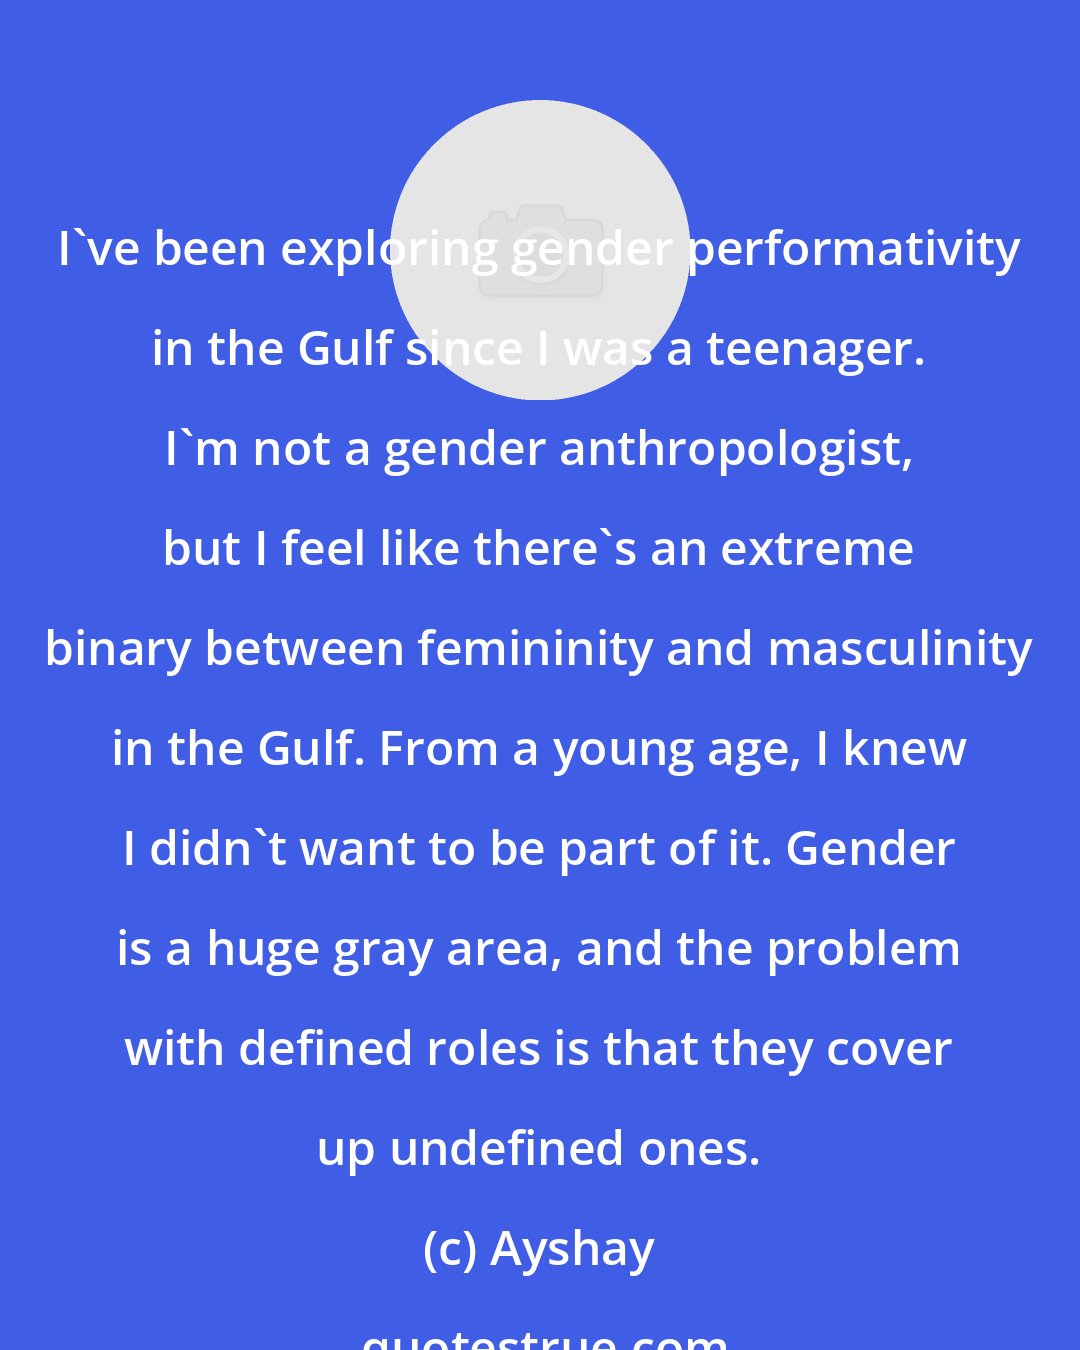 Ayshay: I've been exploring gender performativity in the Gulf since I was a teenager. I'm not a gender anthropologist, but I feel like there's an extreme binary between femininity and masculinity in the Gulf. From a young age, I knew I didn't want to be part of it. Gender is a huge gray area, and the problem with defined roles is that they cover up undefined ones.